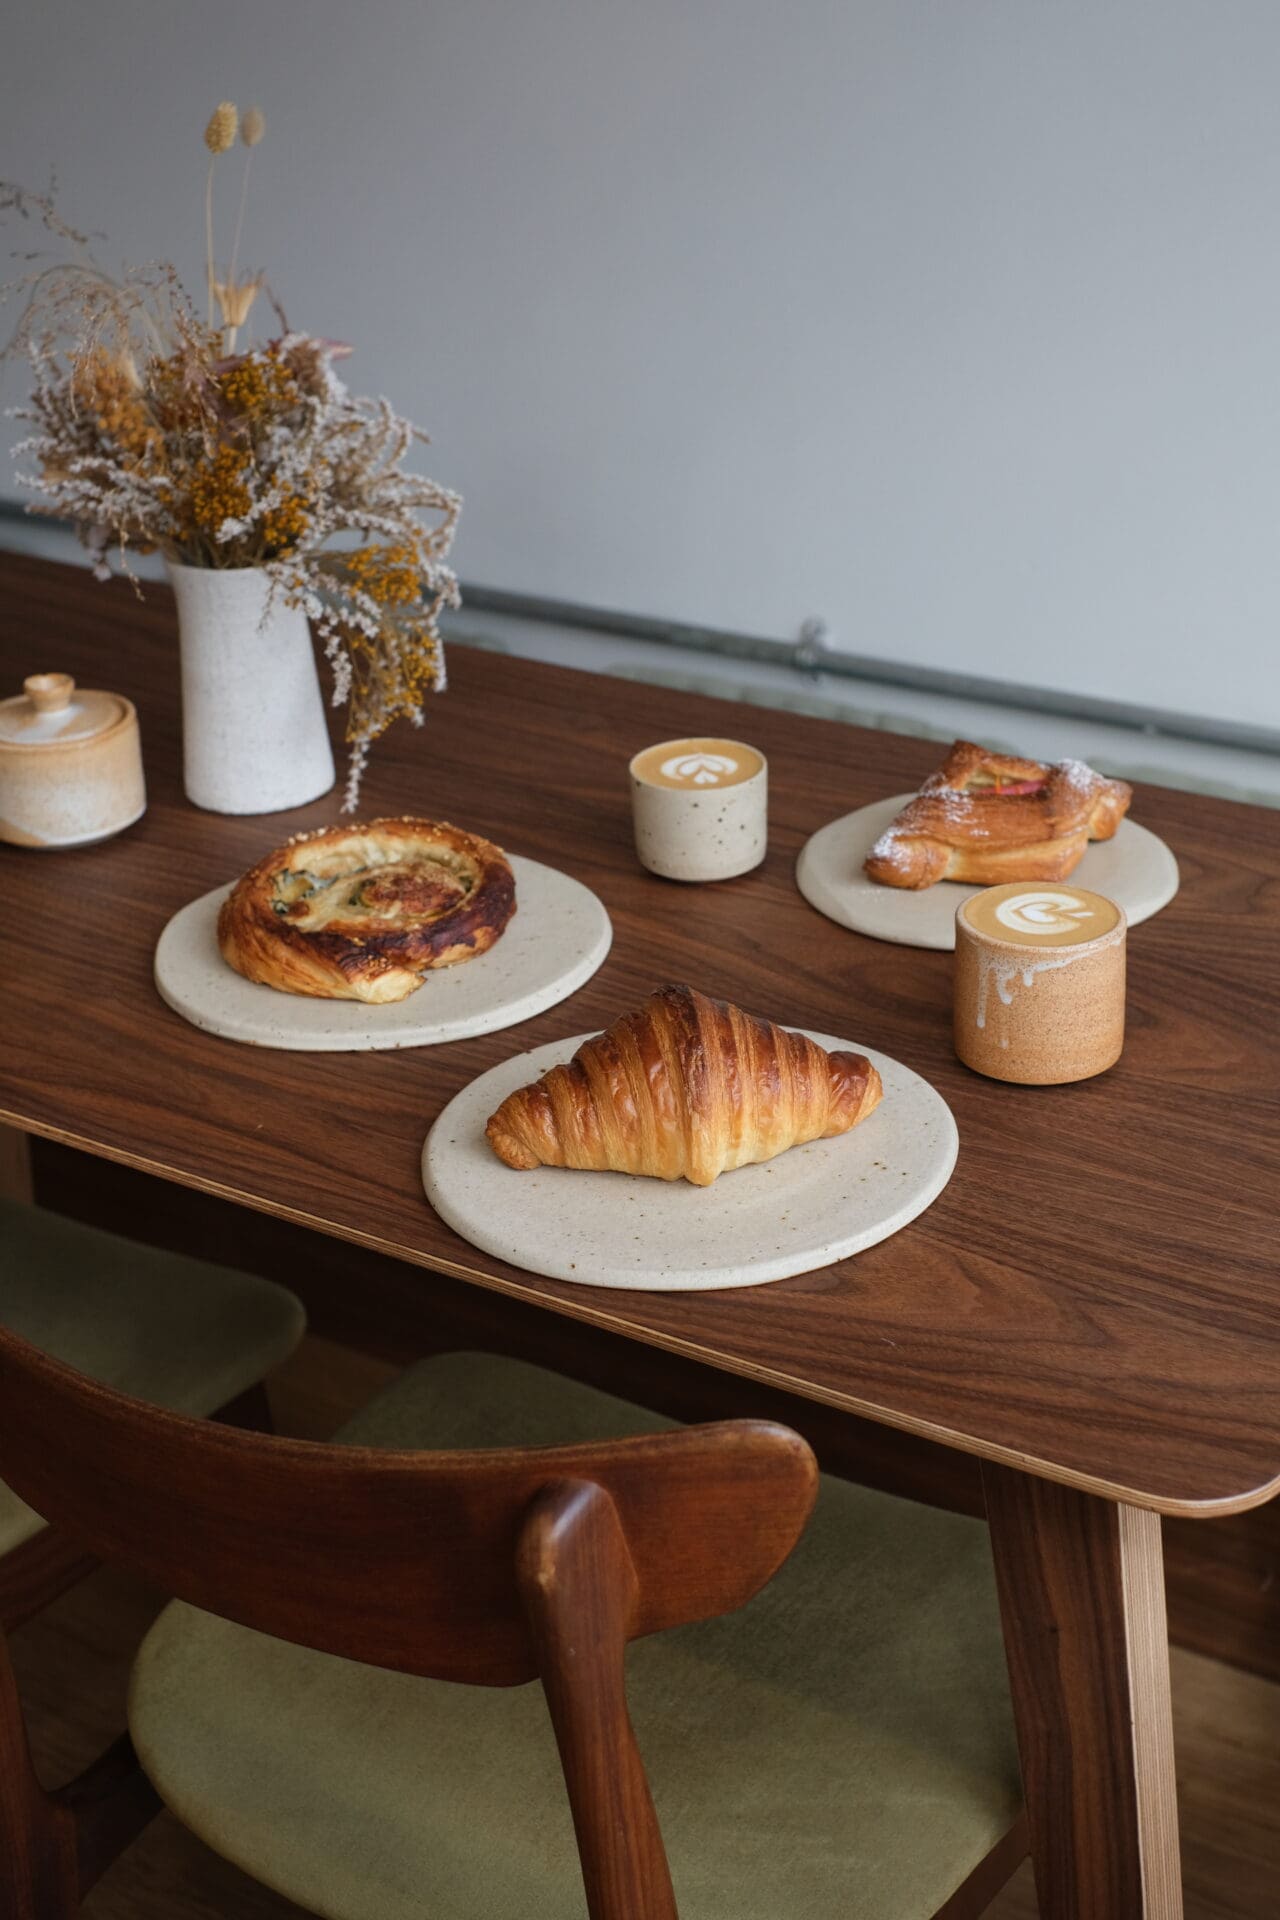 Pastries and coffee on a wooden table at Popham's, one of the best bakeries in London